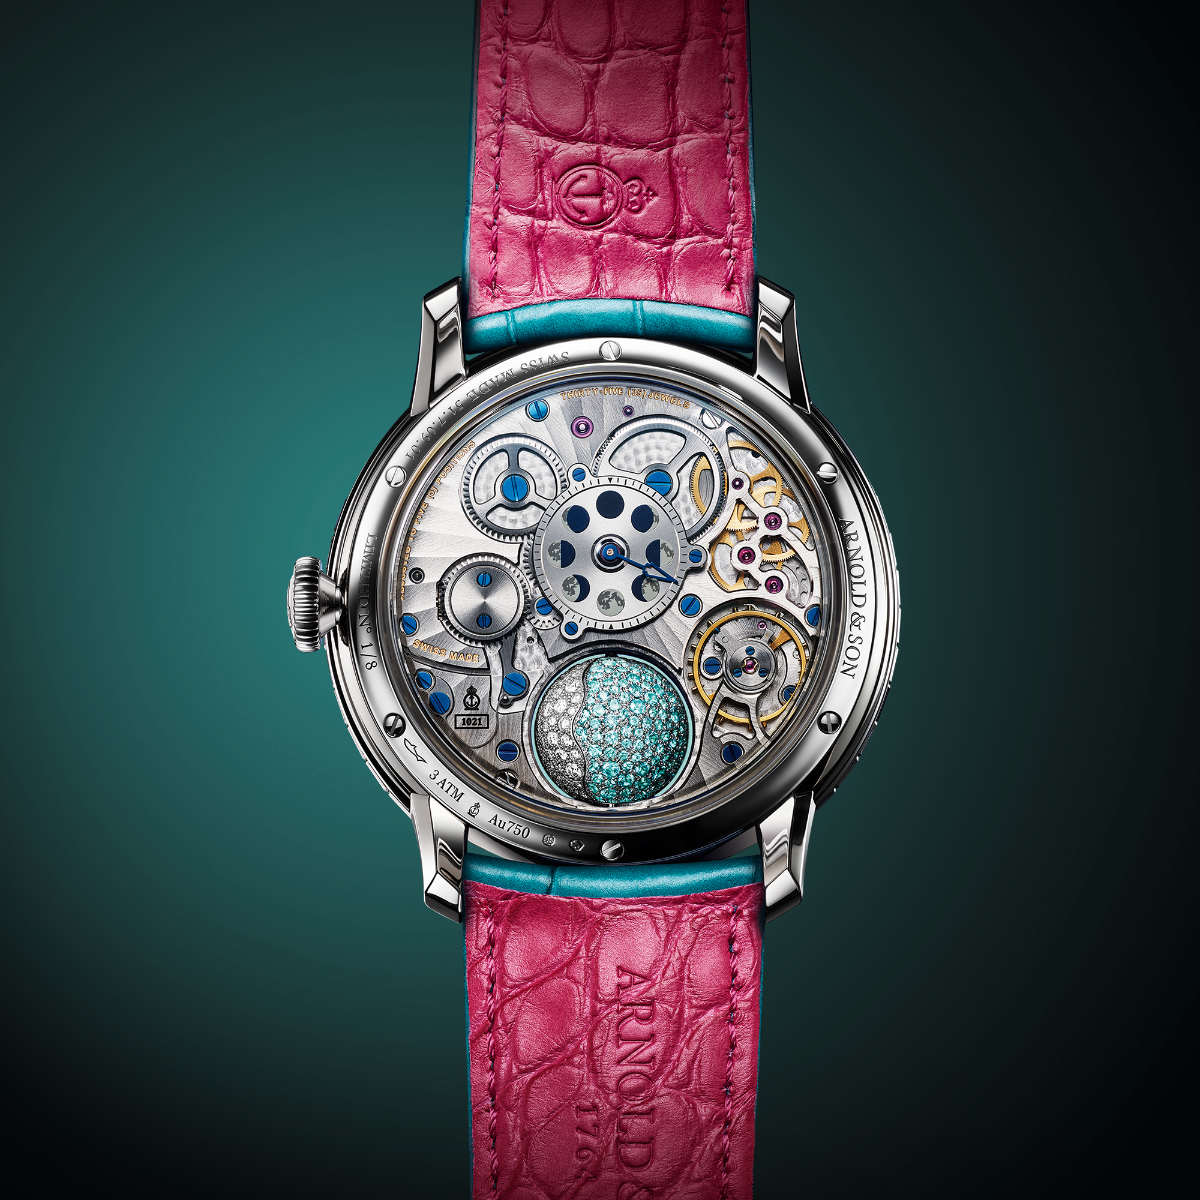 Arnold & Son Presents Its New Luna Magna Ultimate II Watch: A Lagoon-Blue Moon